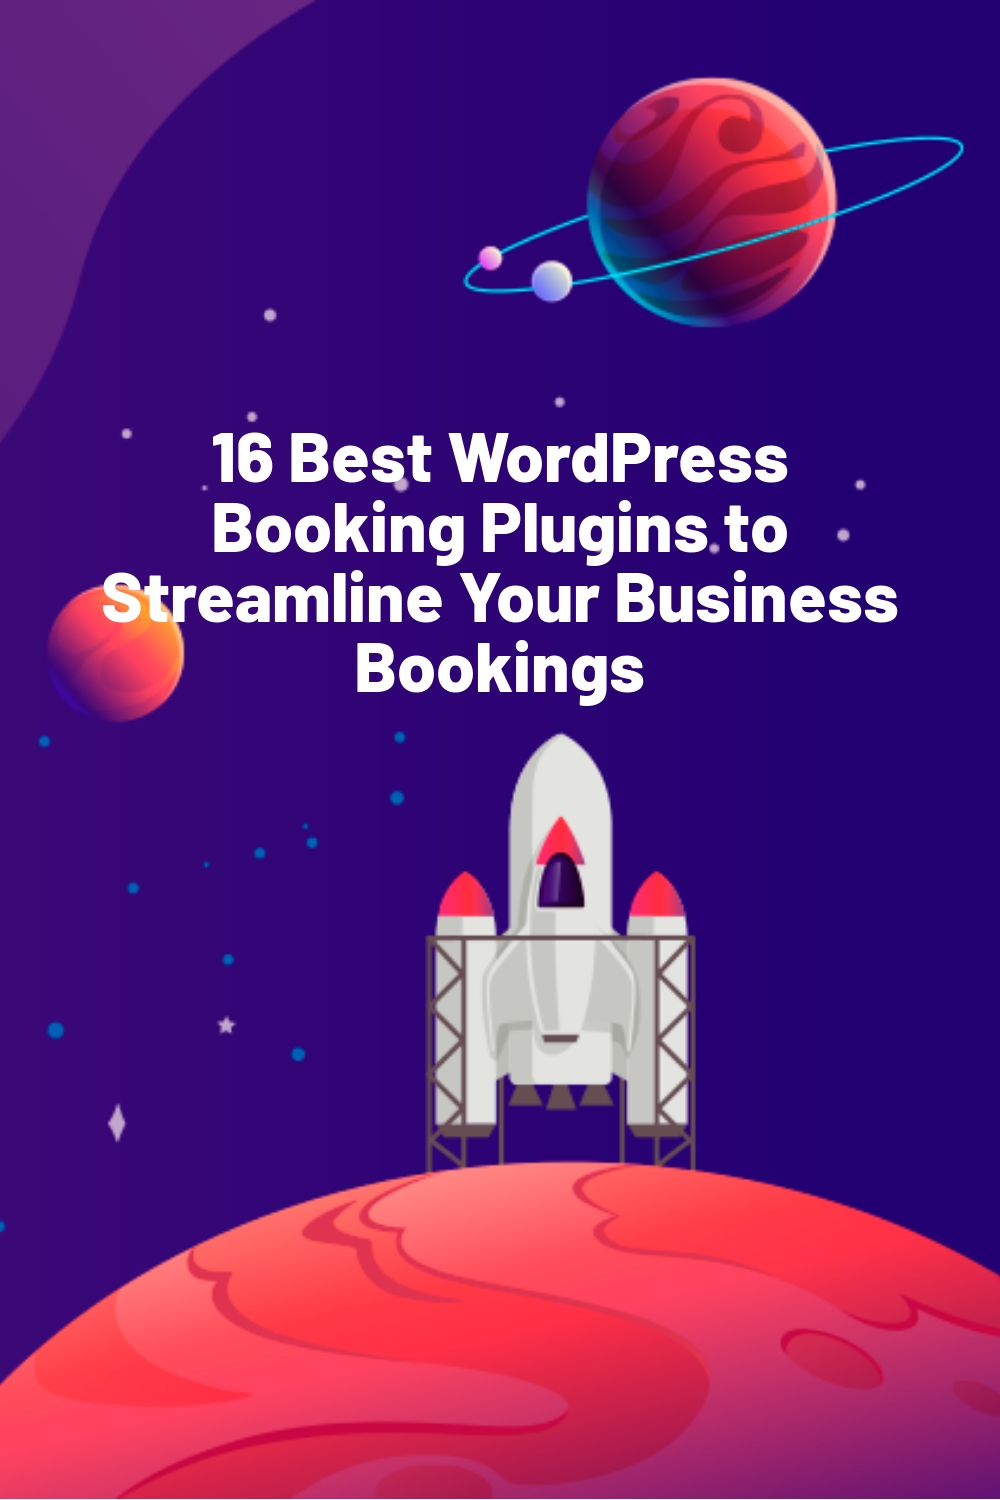 16 Best WordPress Booking Plugins to Streamline Your Business Bookings